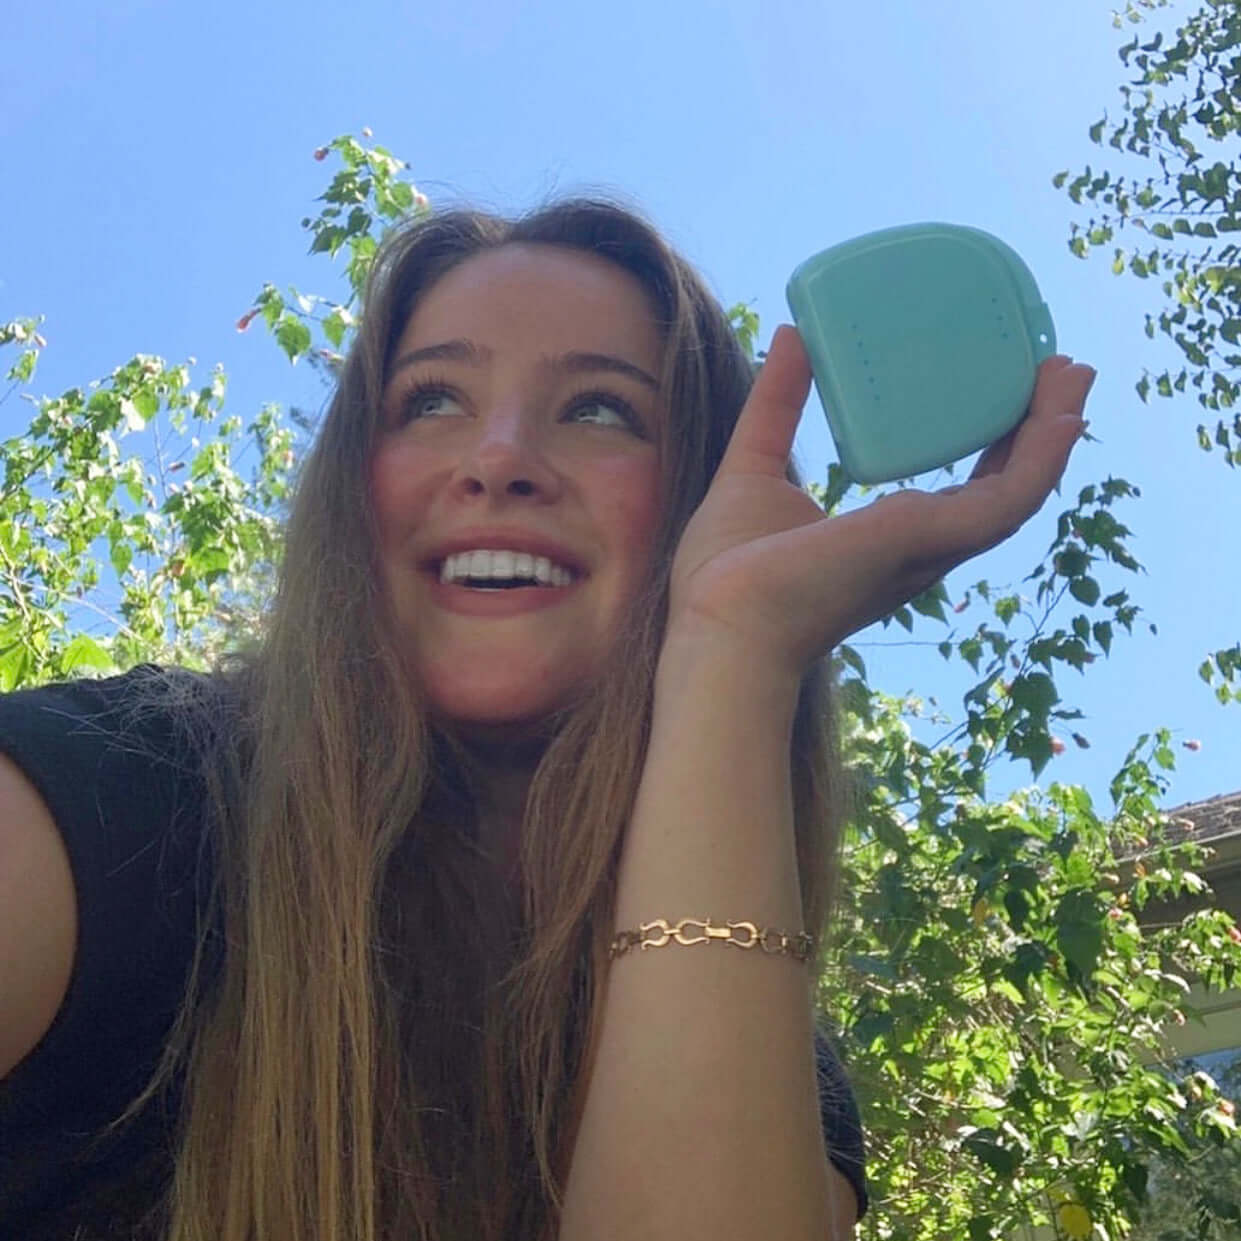 A smiling woman with long hair holds up a small, square, blue object outdoors with greenery in the background, showcasing her bright smile thanks to Night Guard Cleaning + Teeth Whitening Foam (Pack of 2).